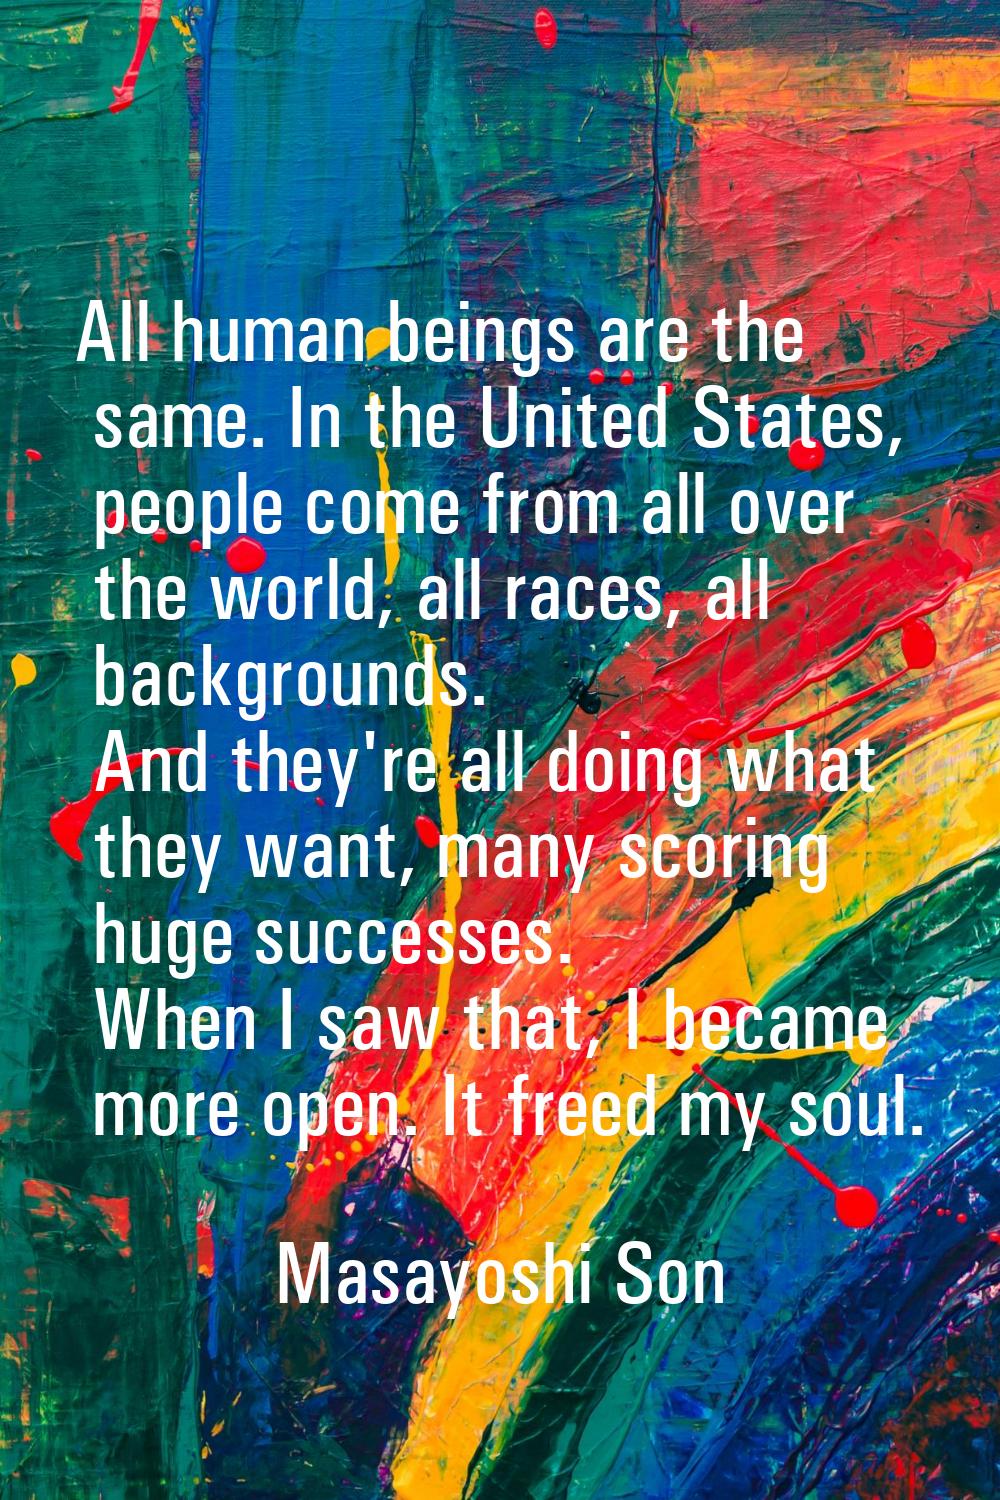 All human beings are the same. In the United States, people come from all over the world, all races